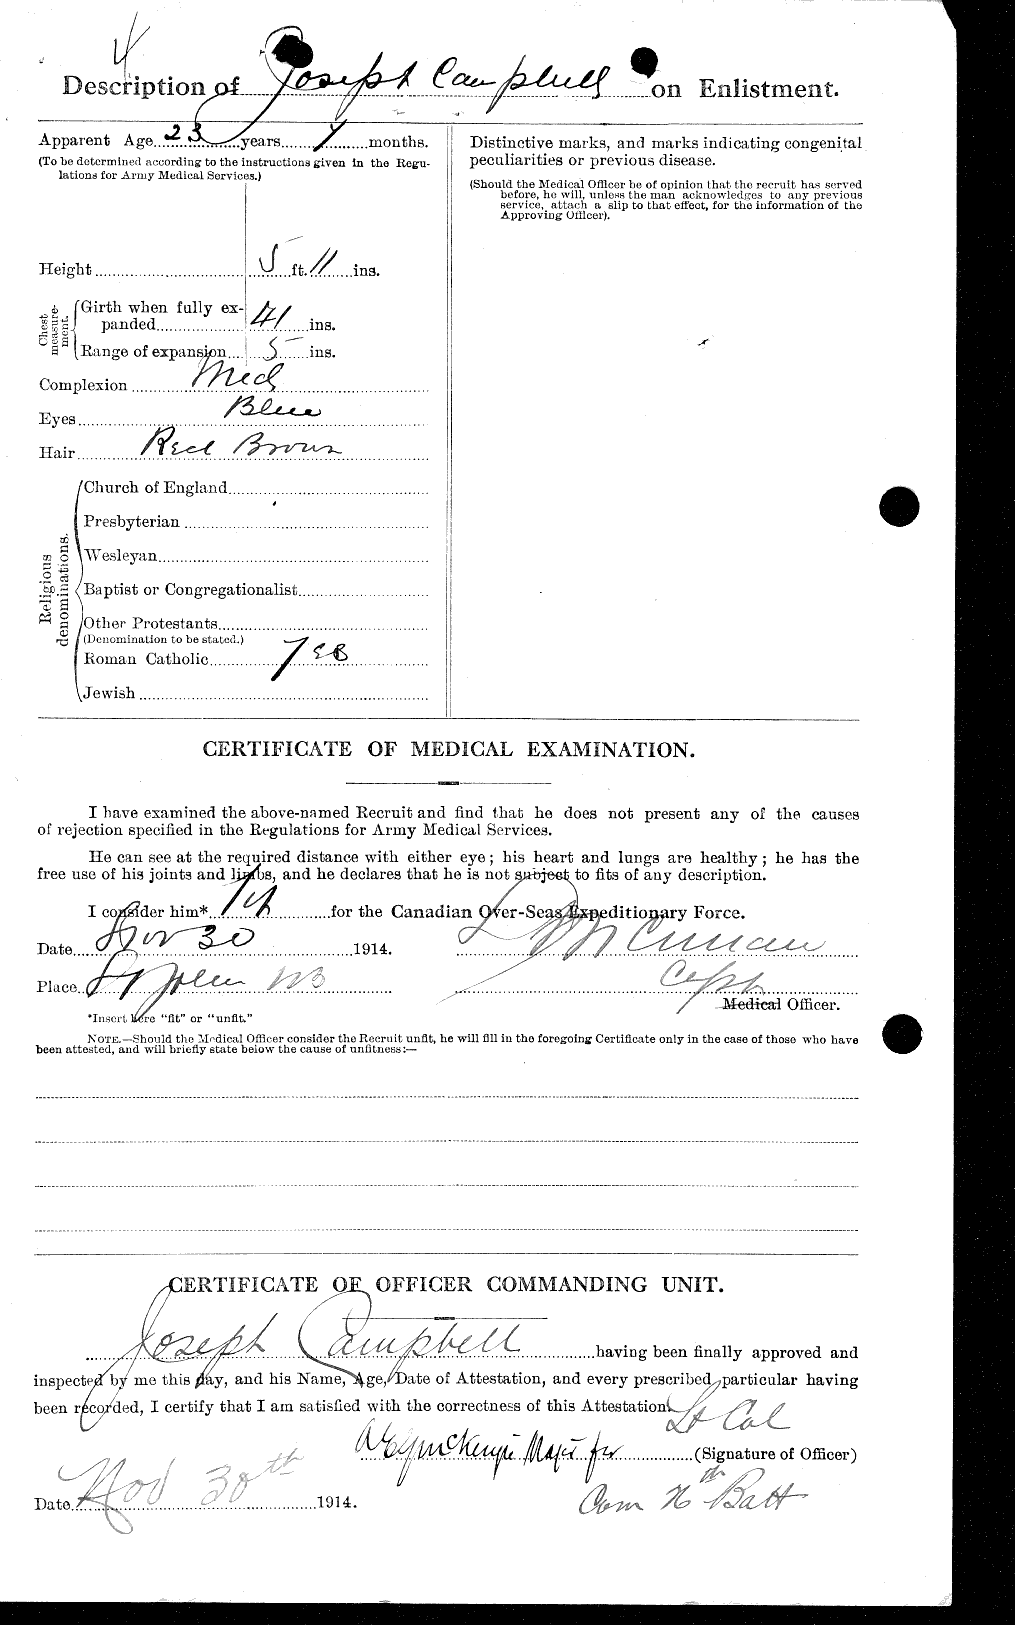 Personnel Records of the First World War - CEF 004964b